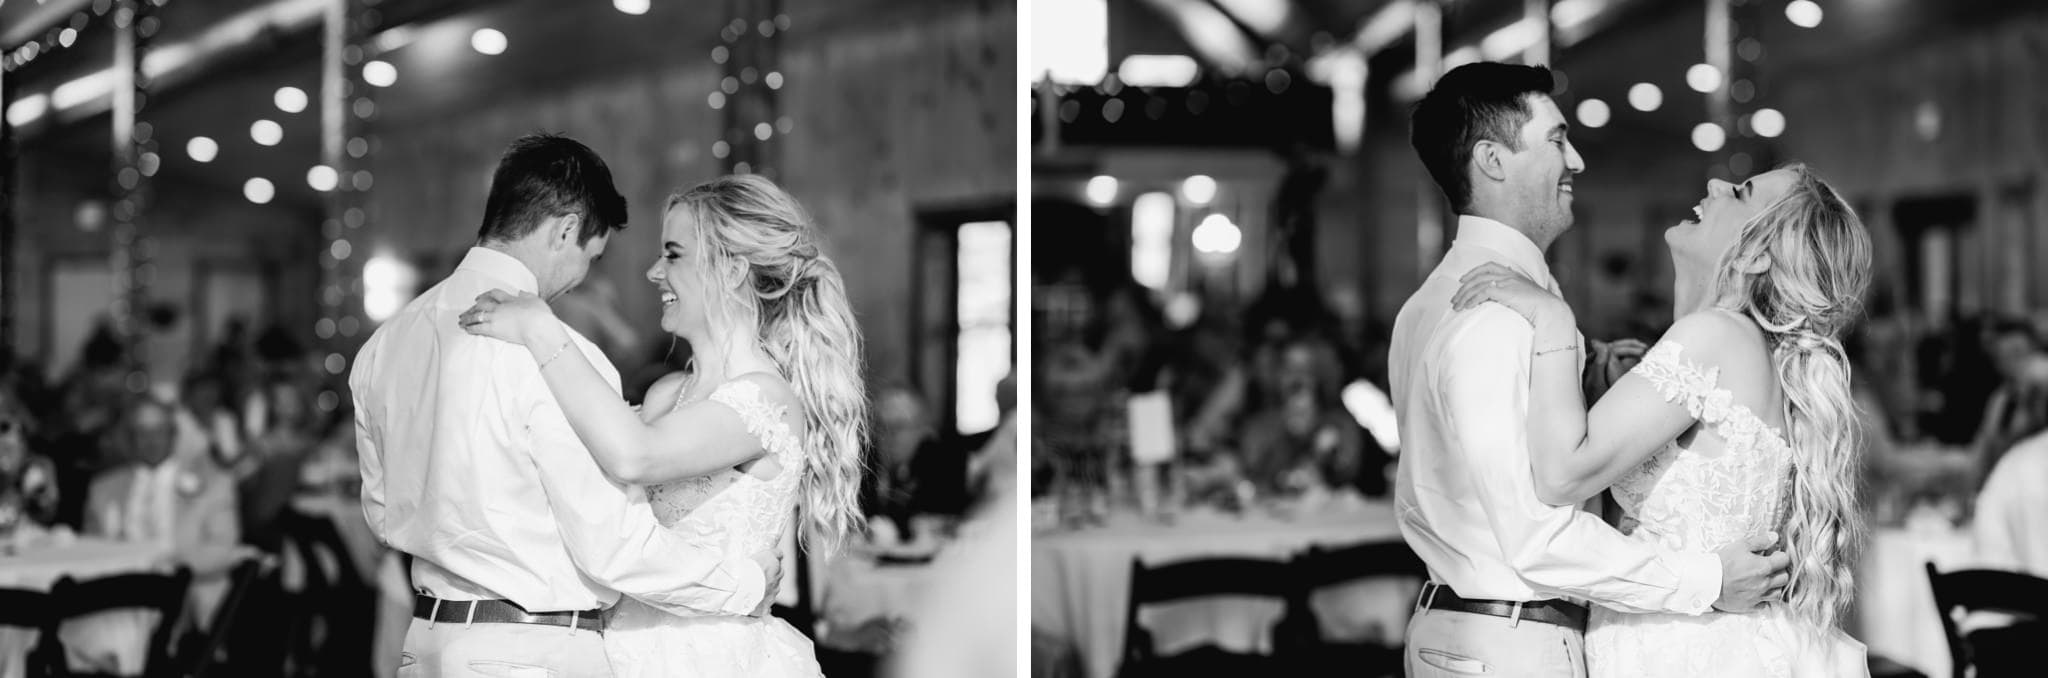 bride and groom dancing at country lane lodge